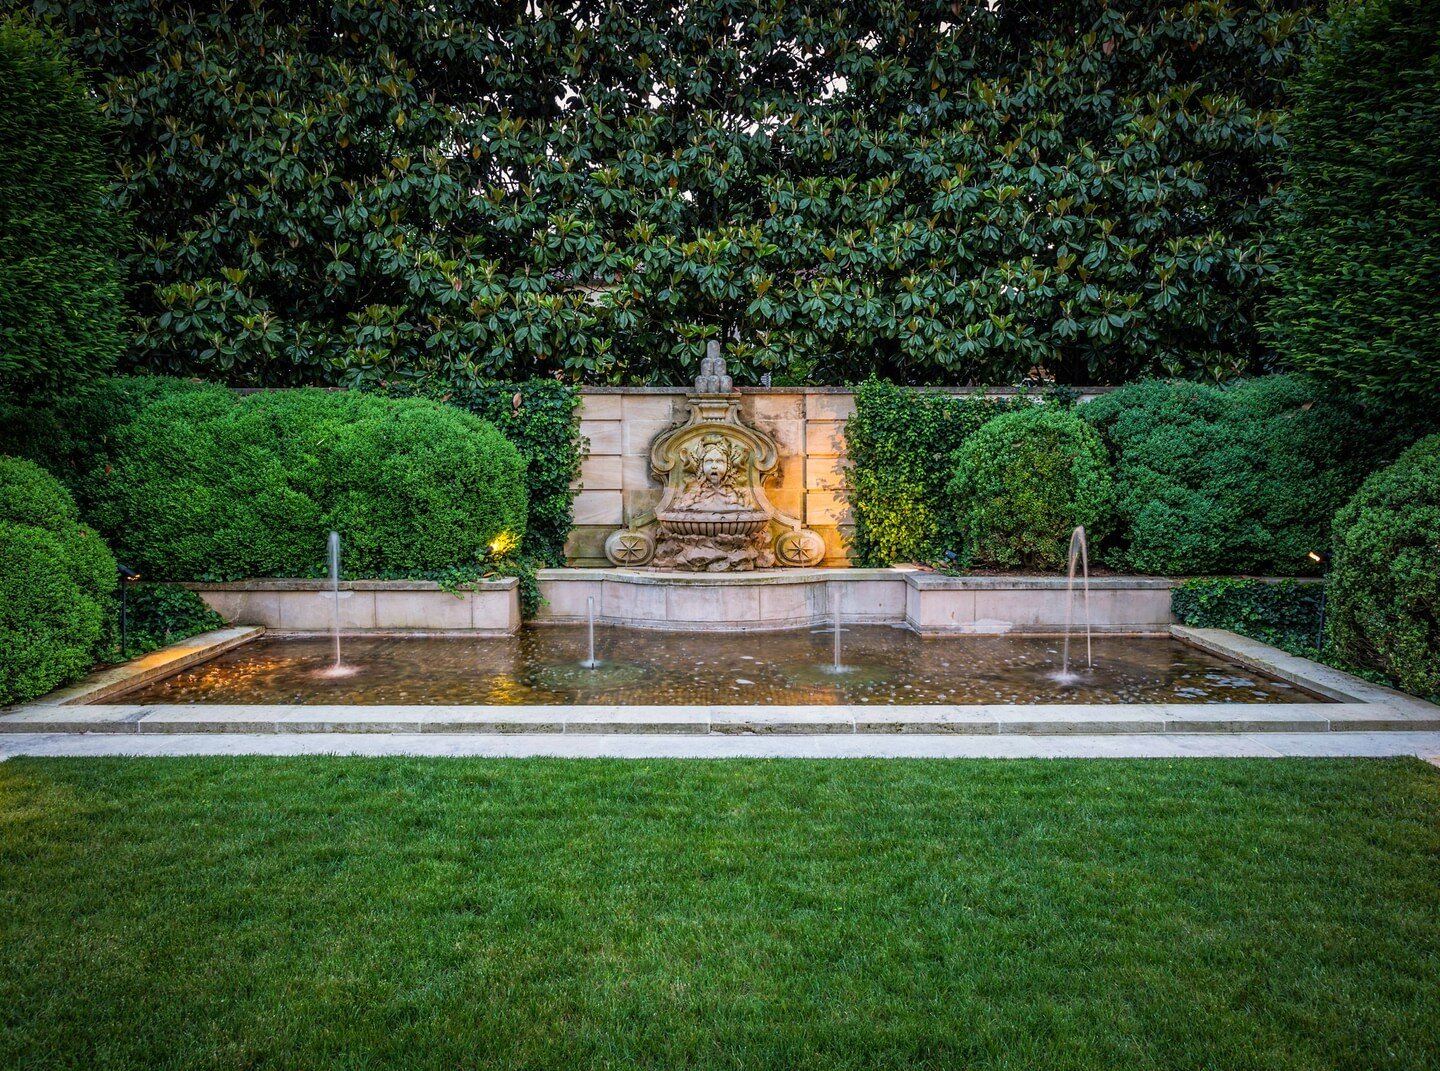 Only those who will risk going too far can possibly find out how far one can go.
- T. S. Eliot
🦉⁠
Photo: @reedbrownphoto
Landscape Architecture: Ben Page @benpagelandscape⁠
.⁠
#landscapearchitecture #landscapearchitect #benpage #pagelandscape #garde